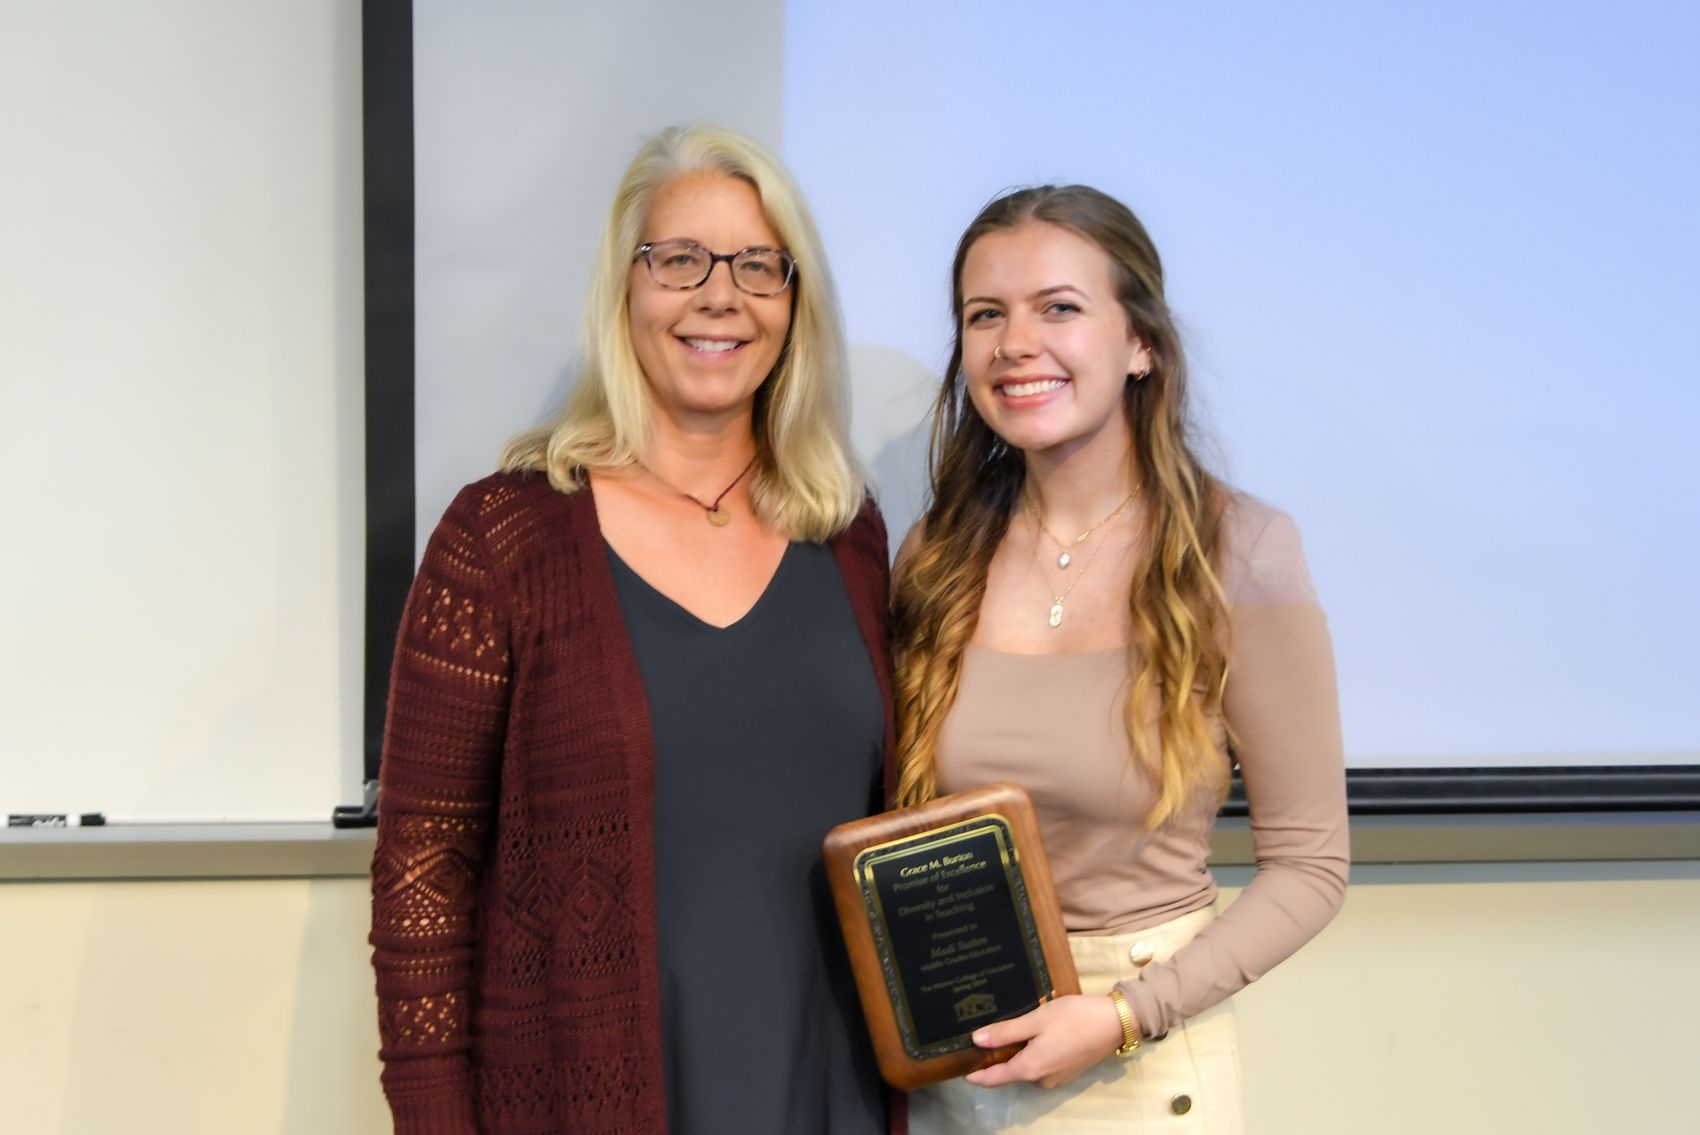 Madi Sutton ’24 is the recipient of the Grace M. Burton Promise of Excellence for Diversity and Inclusion in Teaching Award. Madi graduated in May with a degree in Middle Grades Education.